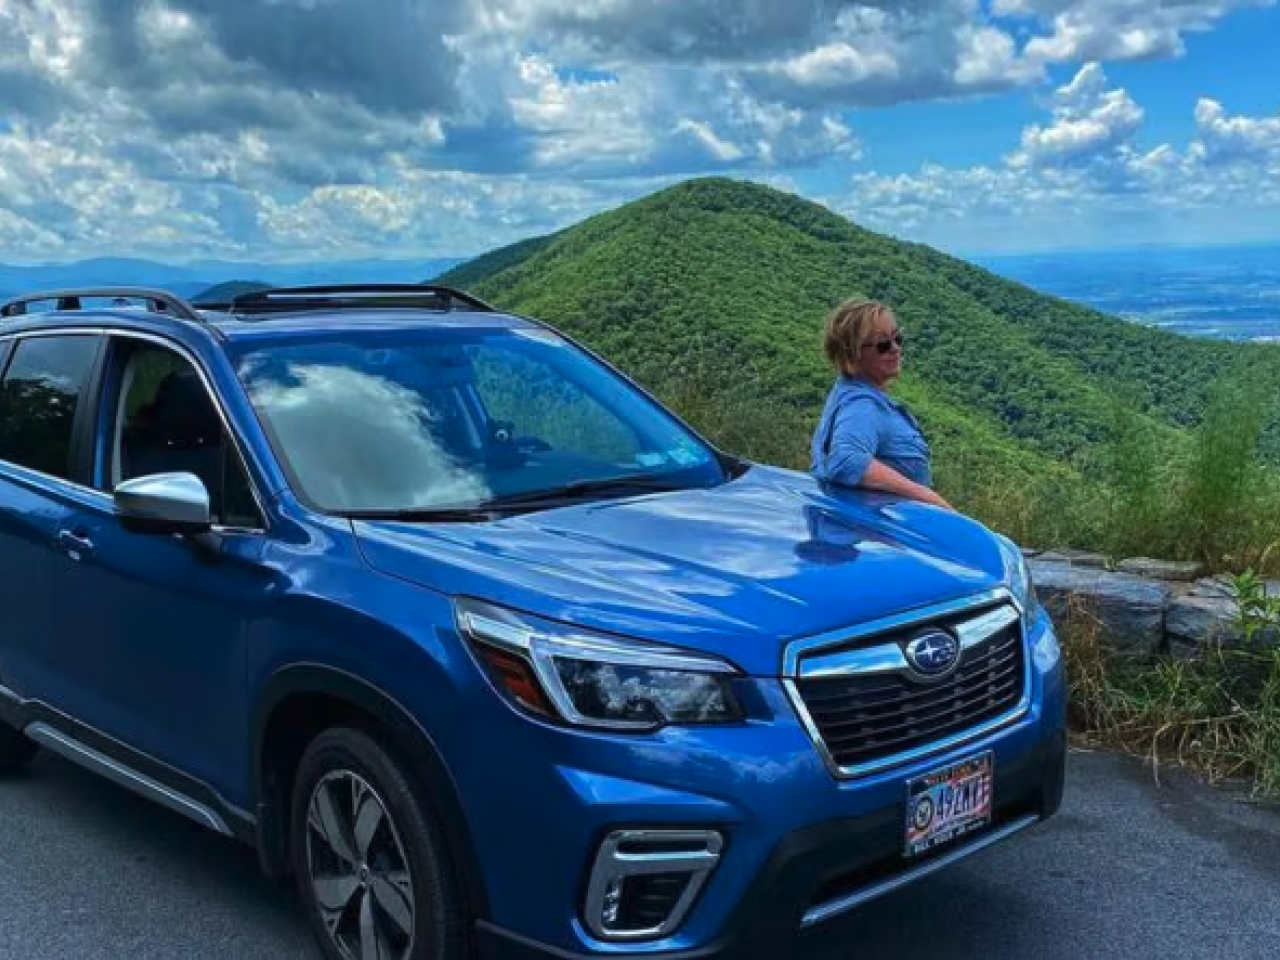 A person leaning against a blue Subaru car, looking out at a long range view